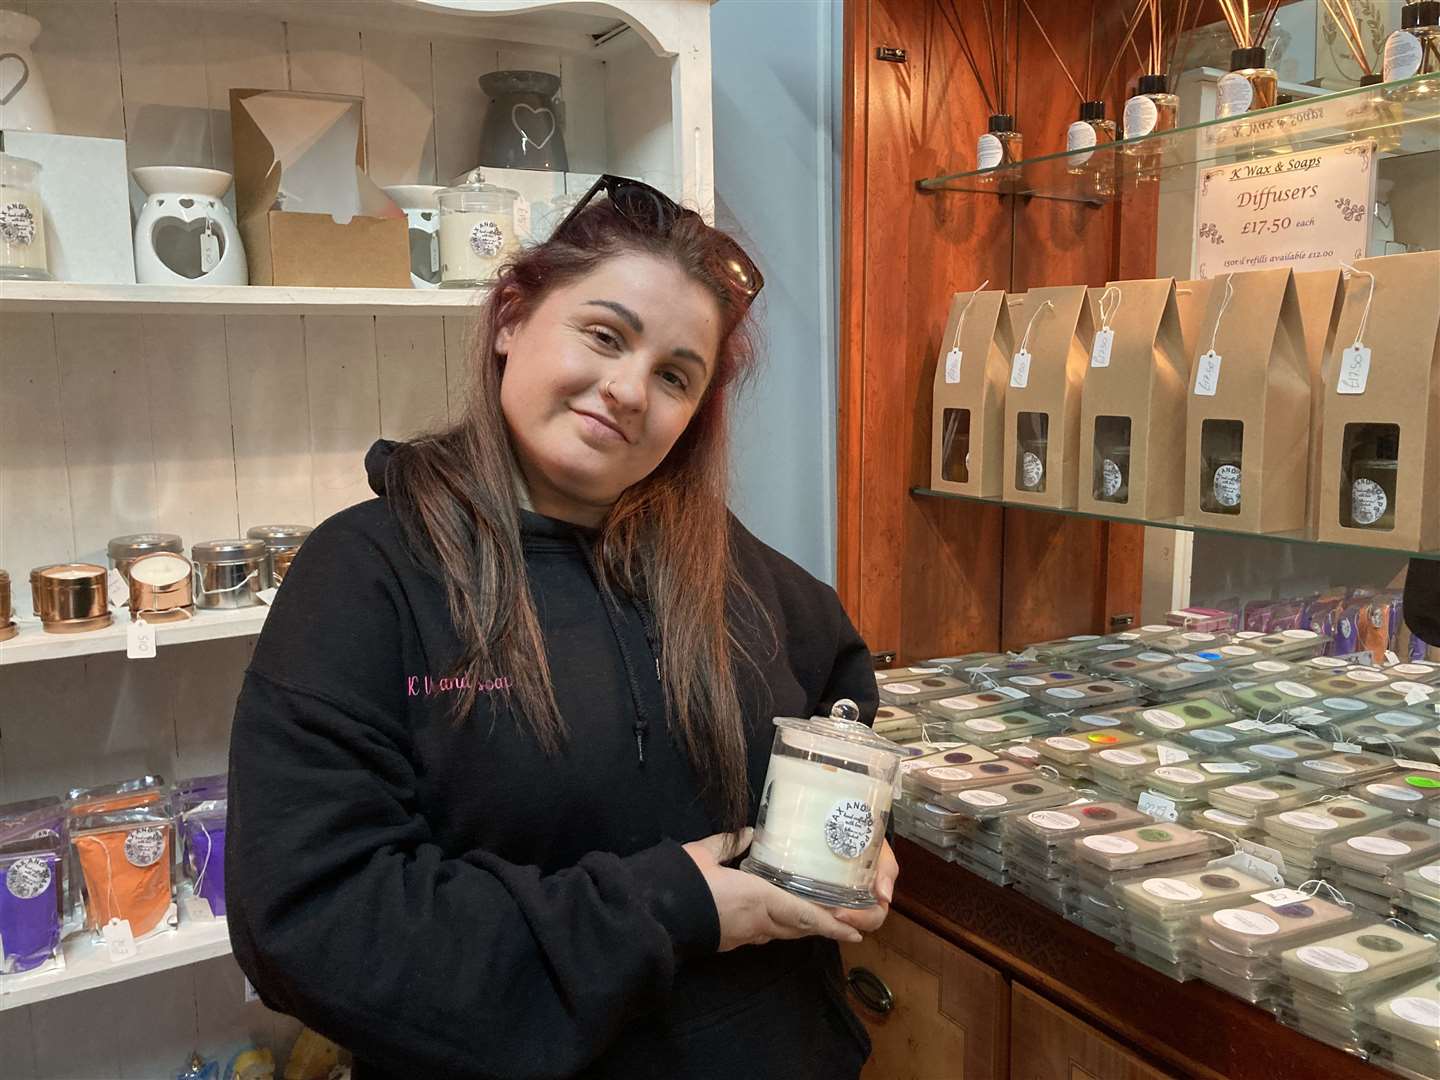 Kirsty Stevenson from Conyer is selling candles and soaps at Buckleys indoor market in Sittingbourne High Street. Picture: John Nurden